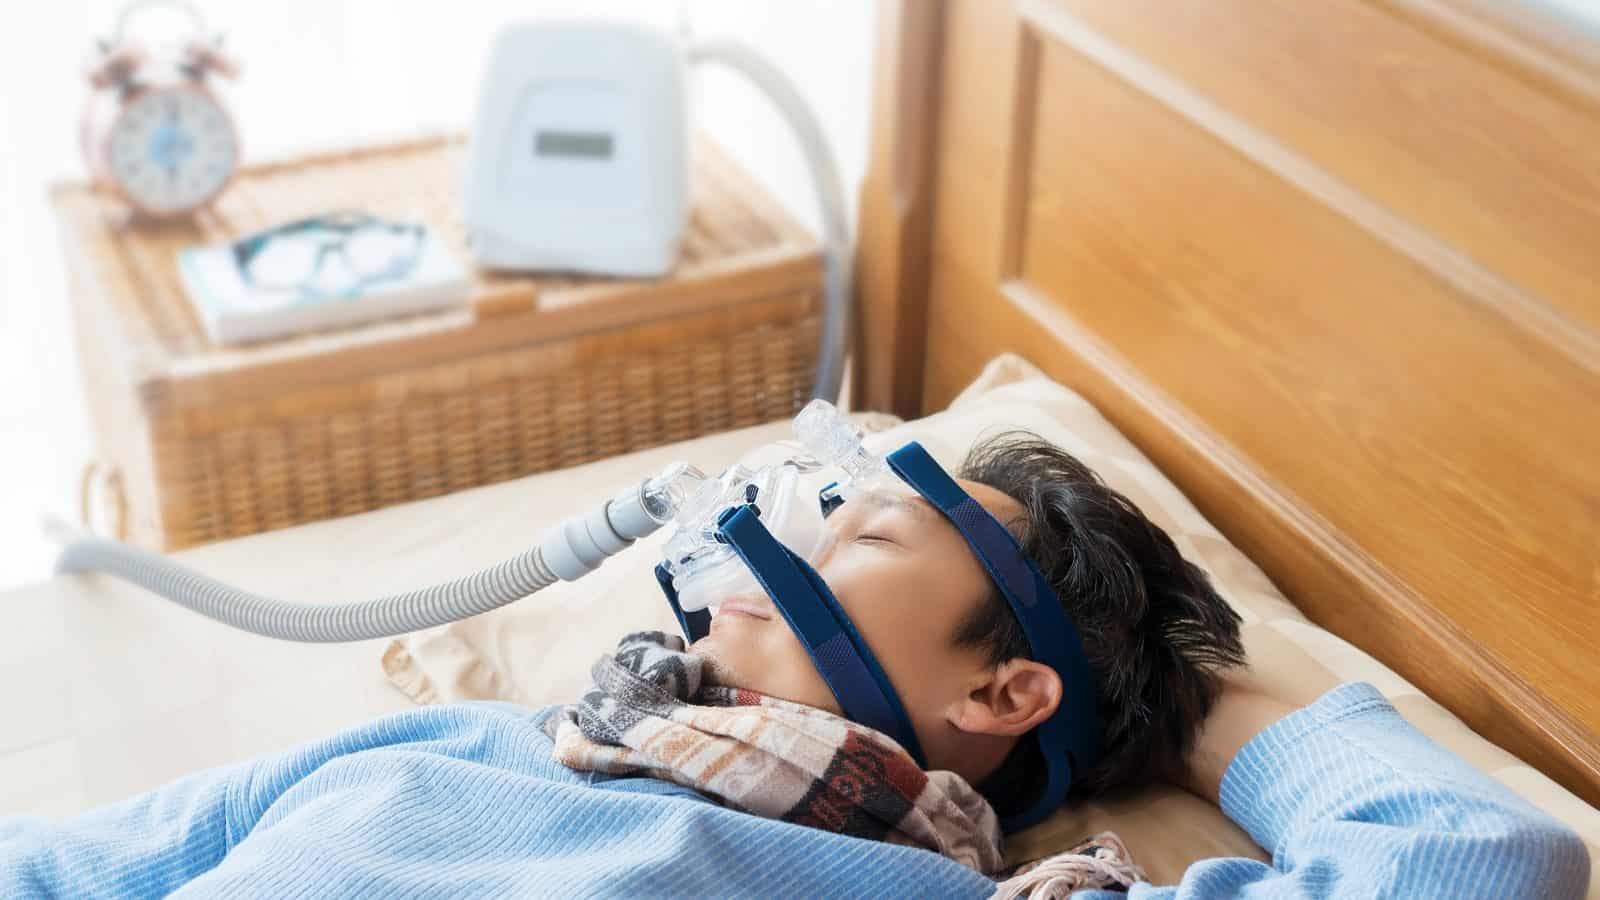 Easily use your CPAP machine with these compliance tips